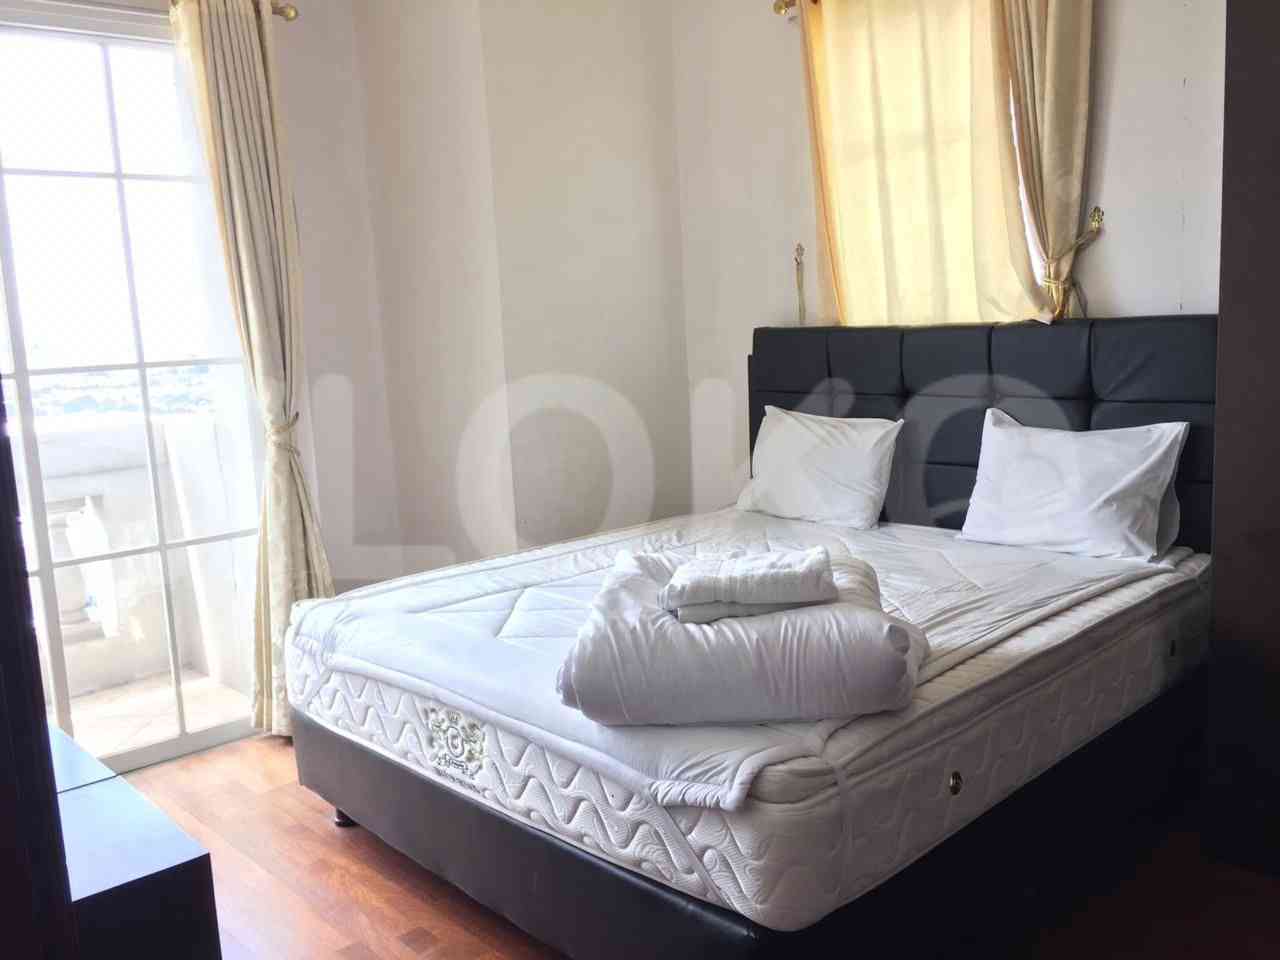 2 Bedroom on 18th Floor for Rent in Bellezza Apartment - fpe84b 1